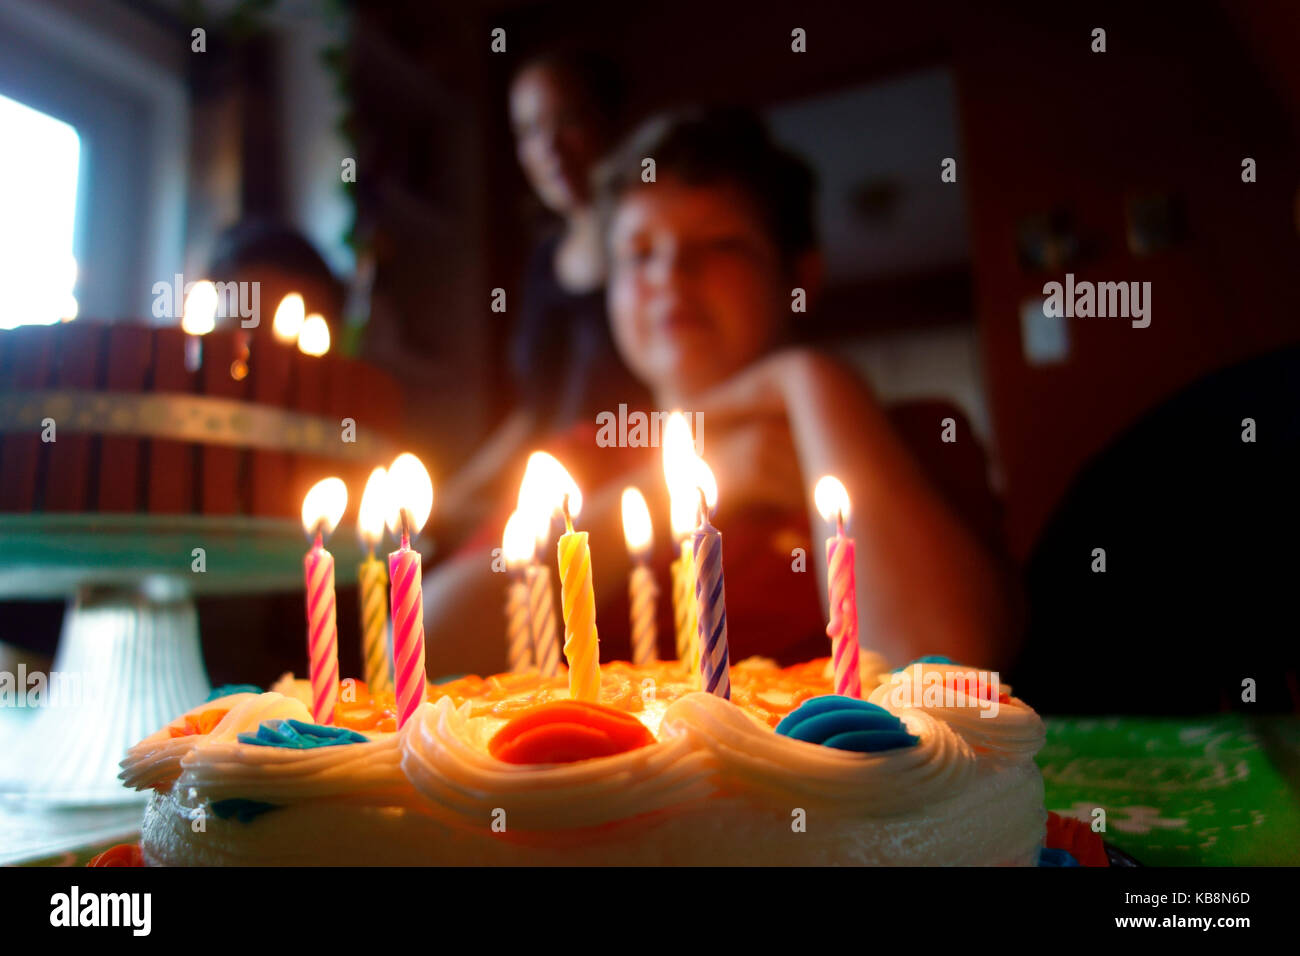 A birthday cake with lit candles in front of an 11 year old boy Stock Photo